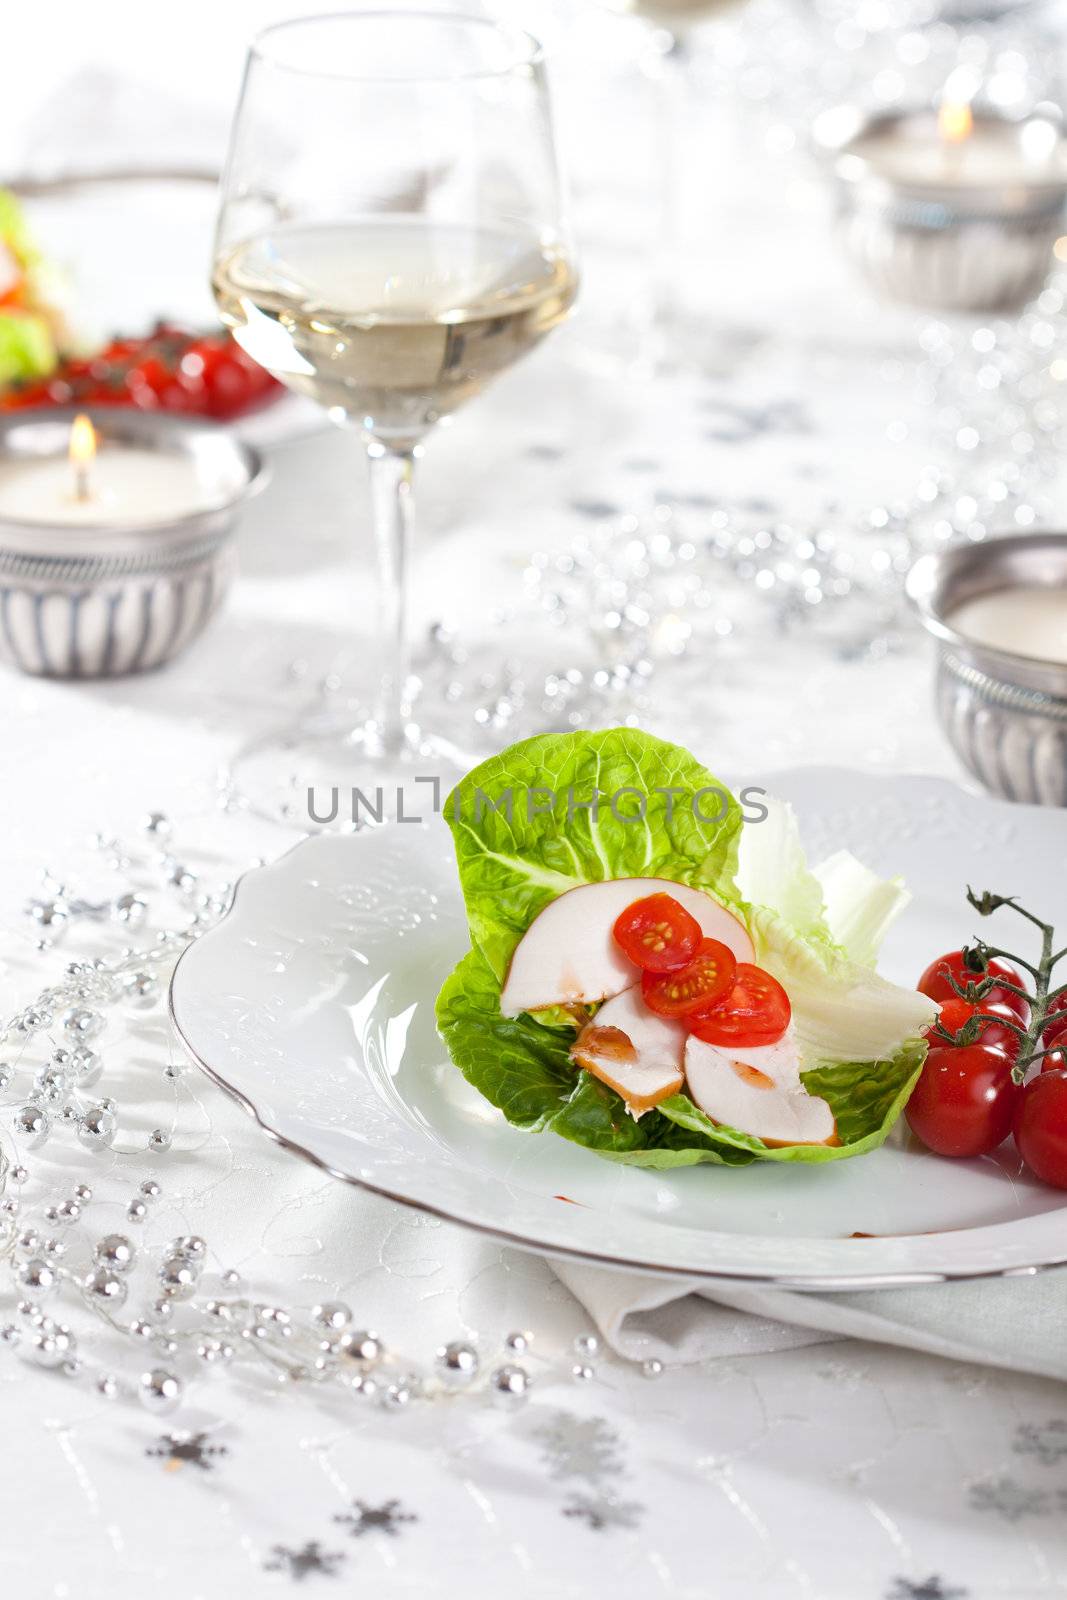 Pretty christmas table setting with small appetizer on plate